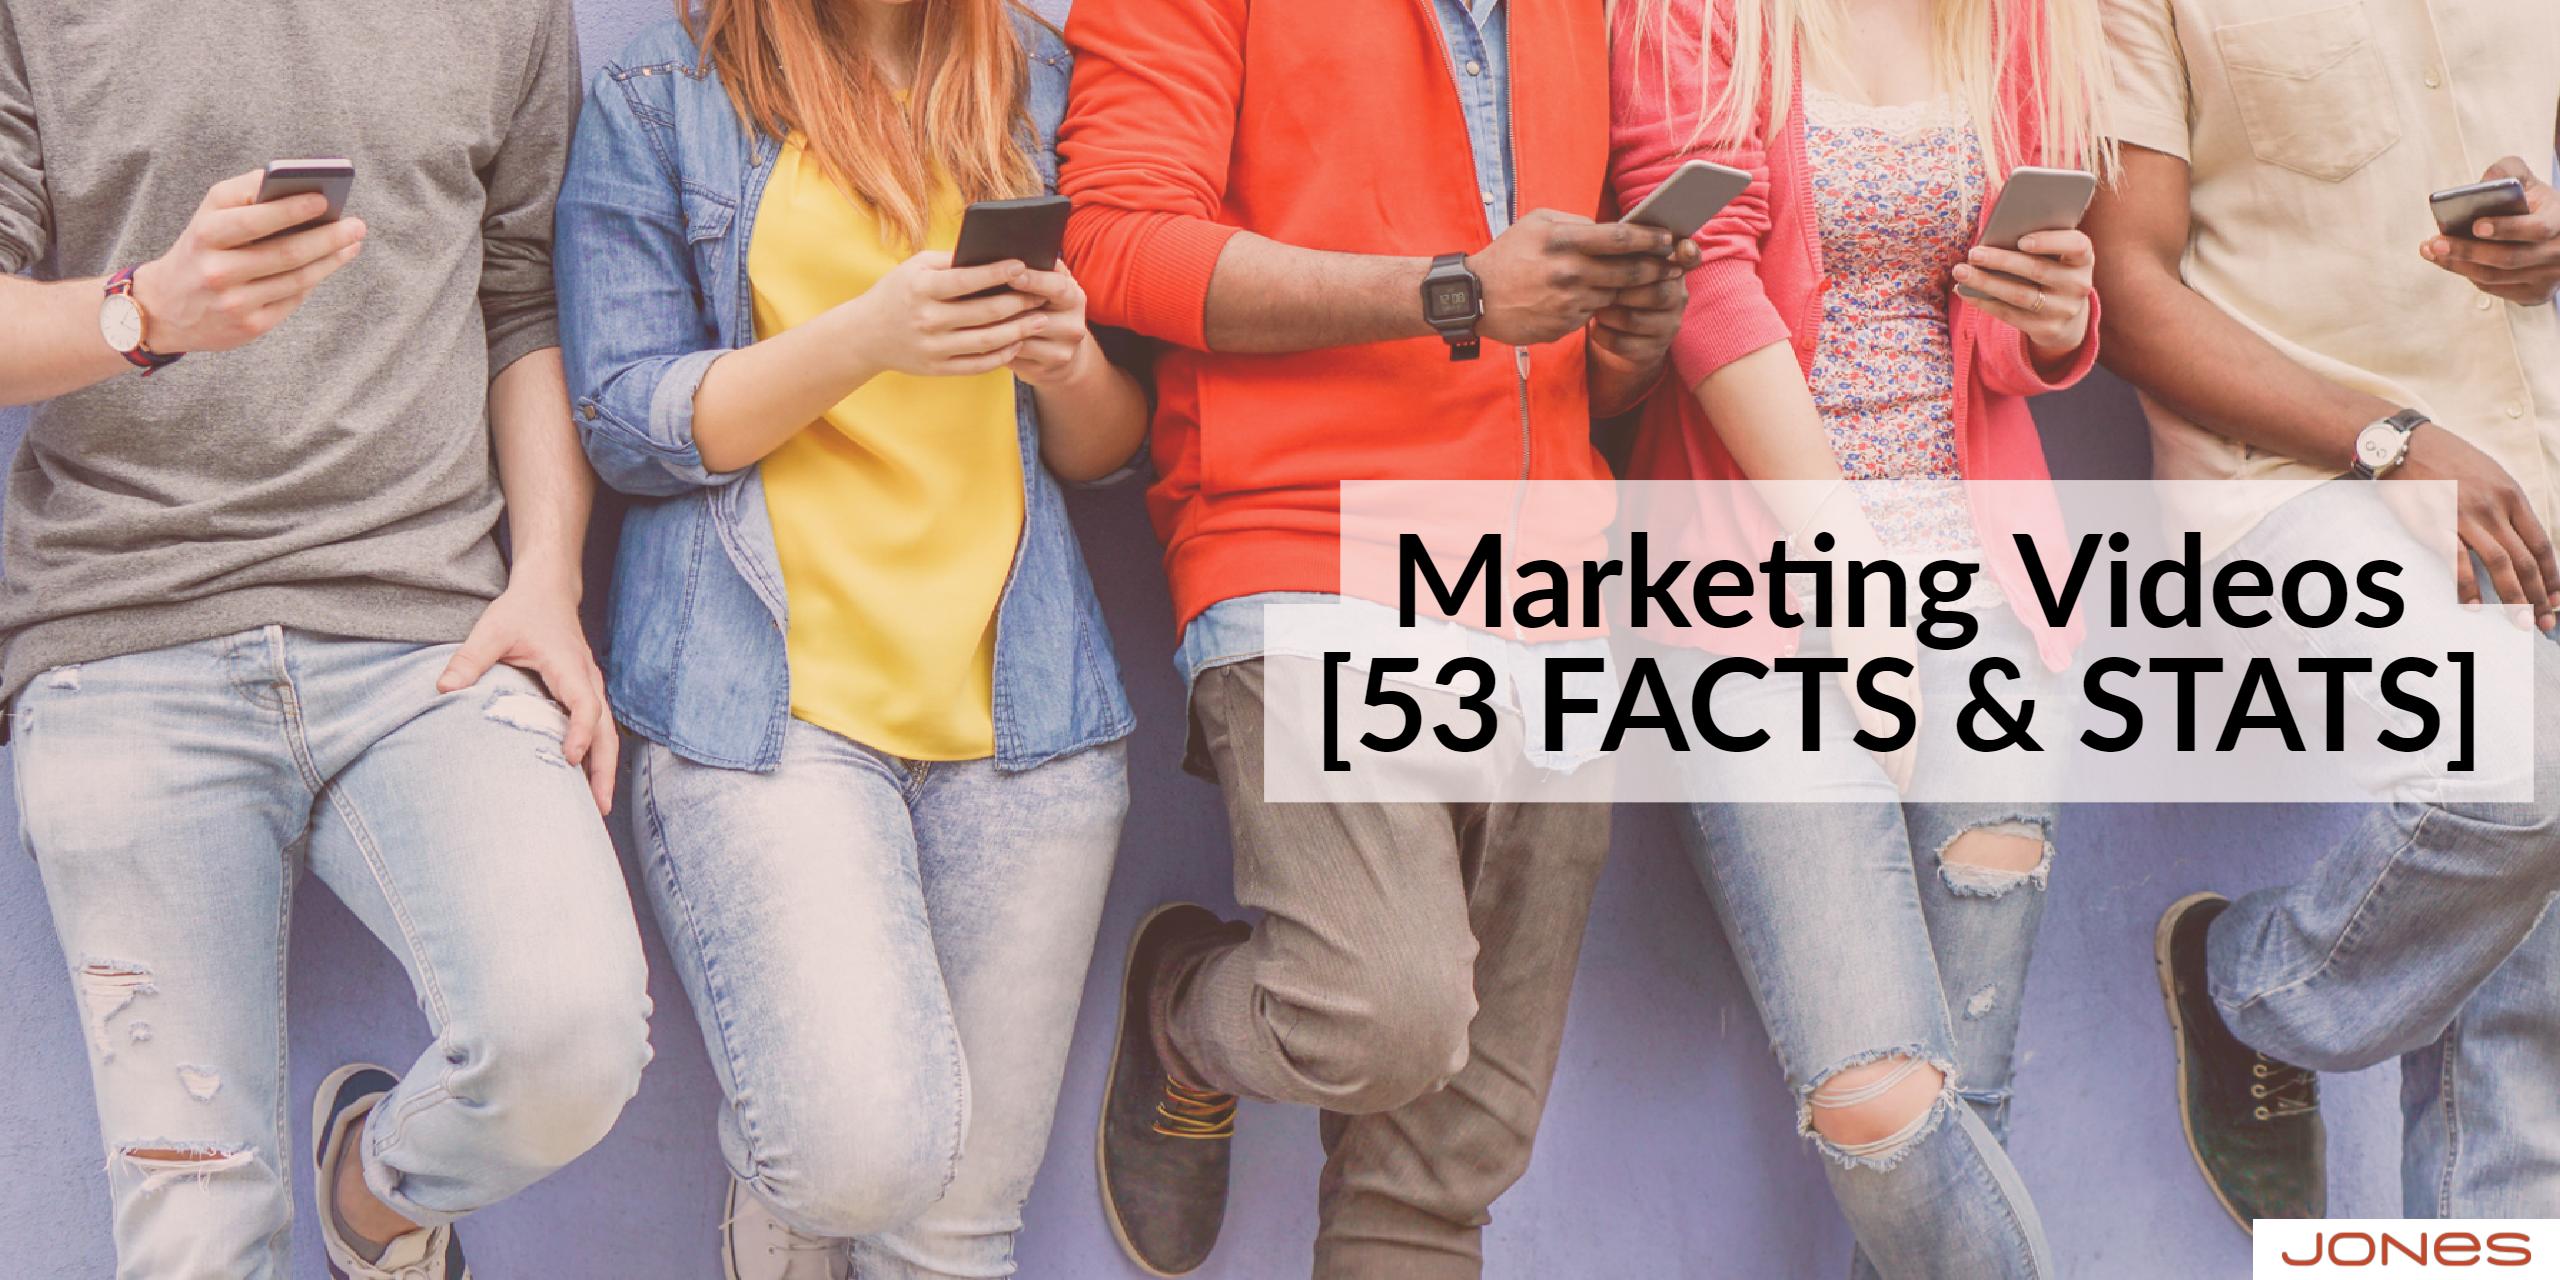 53 Facts & Stats About Marketing Videos